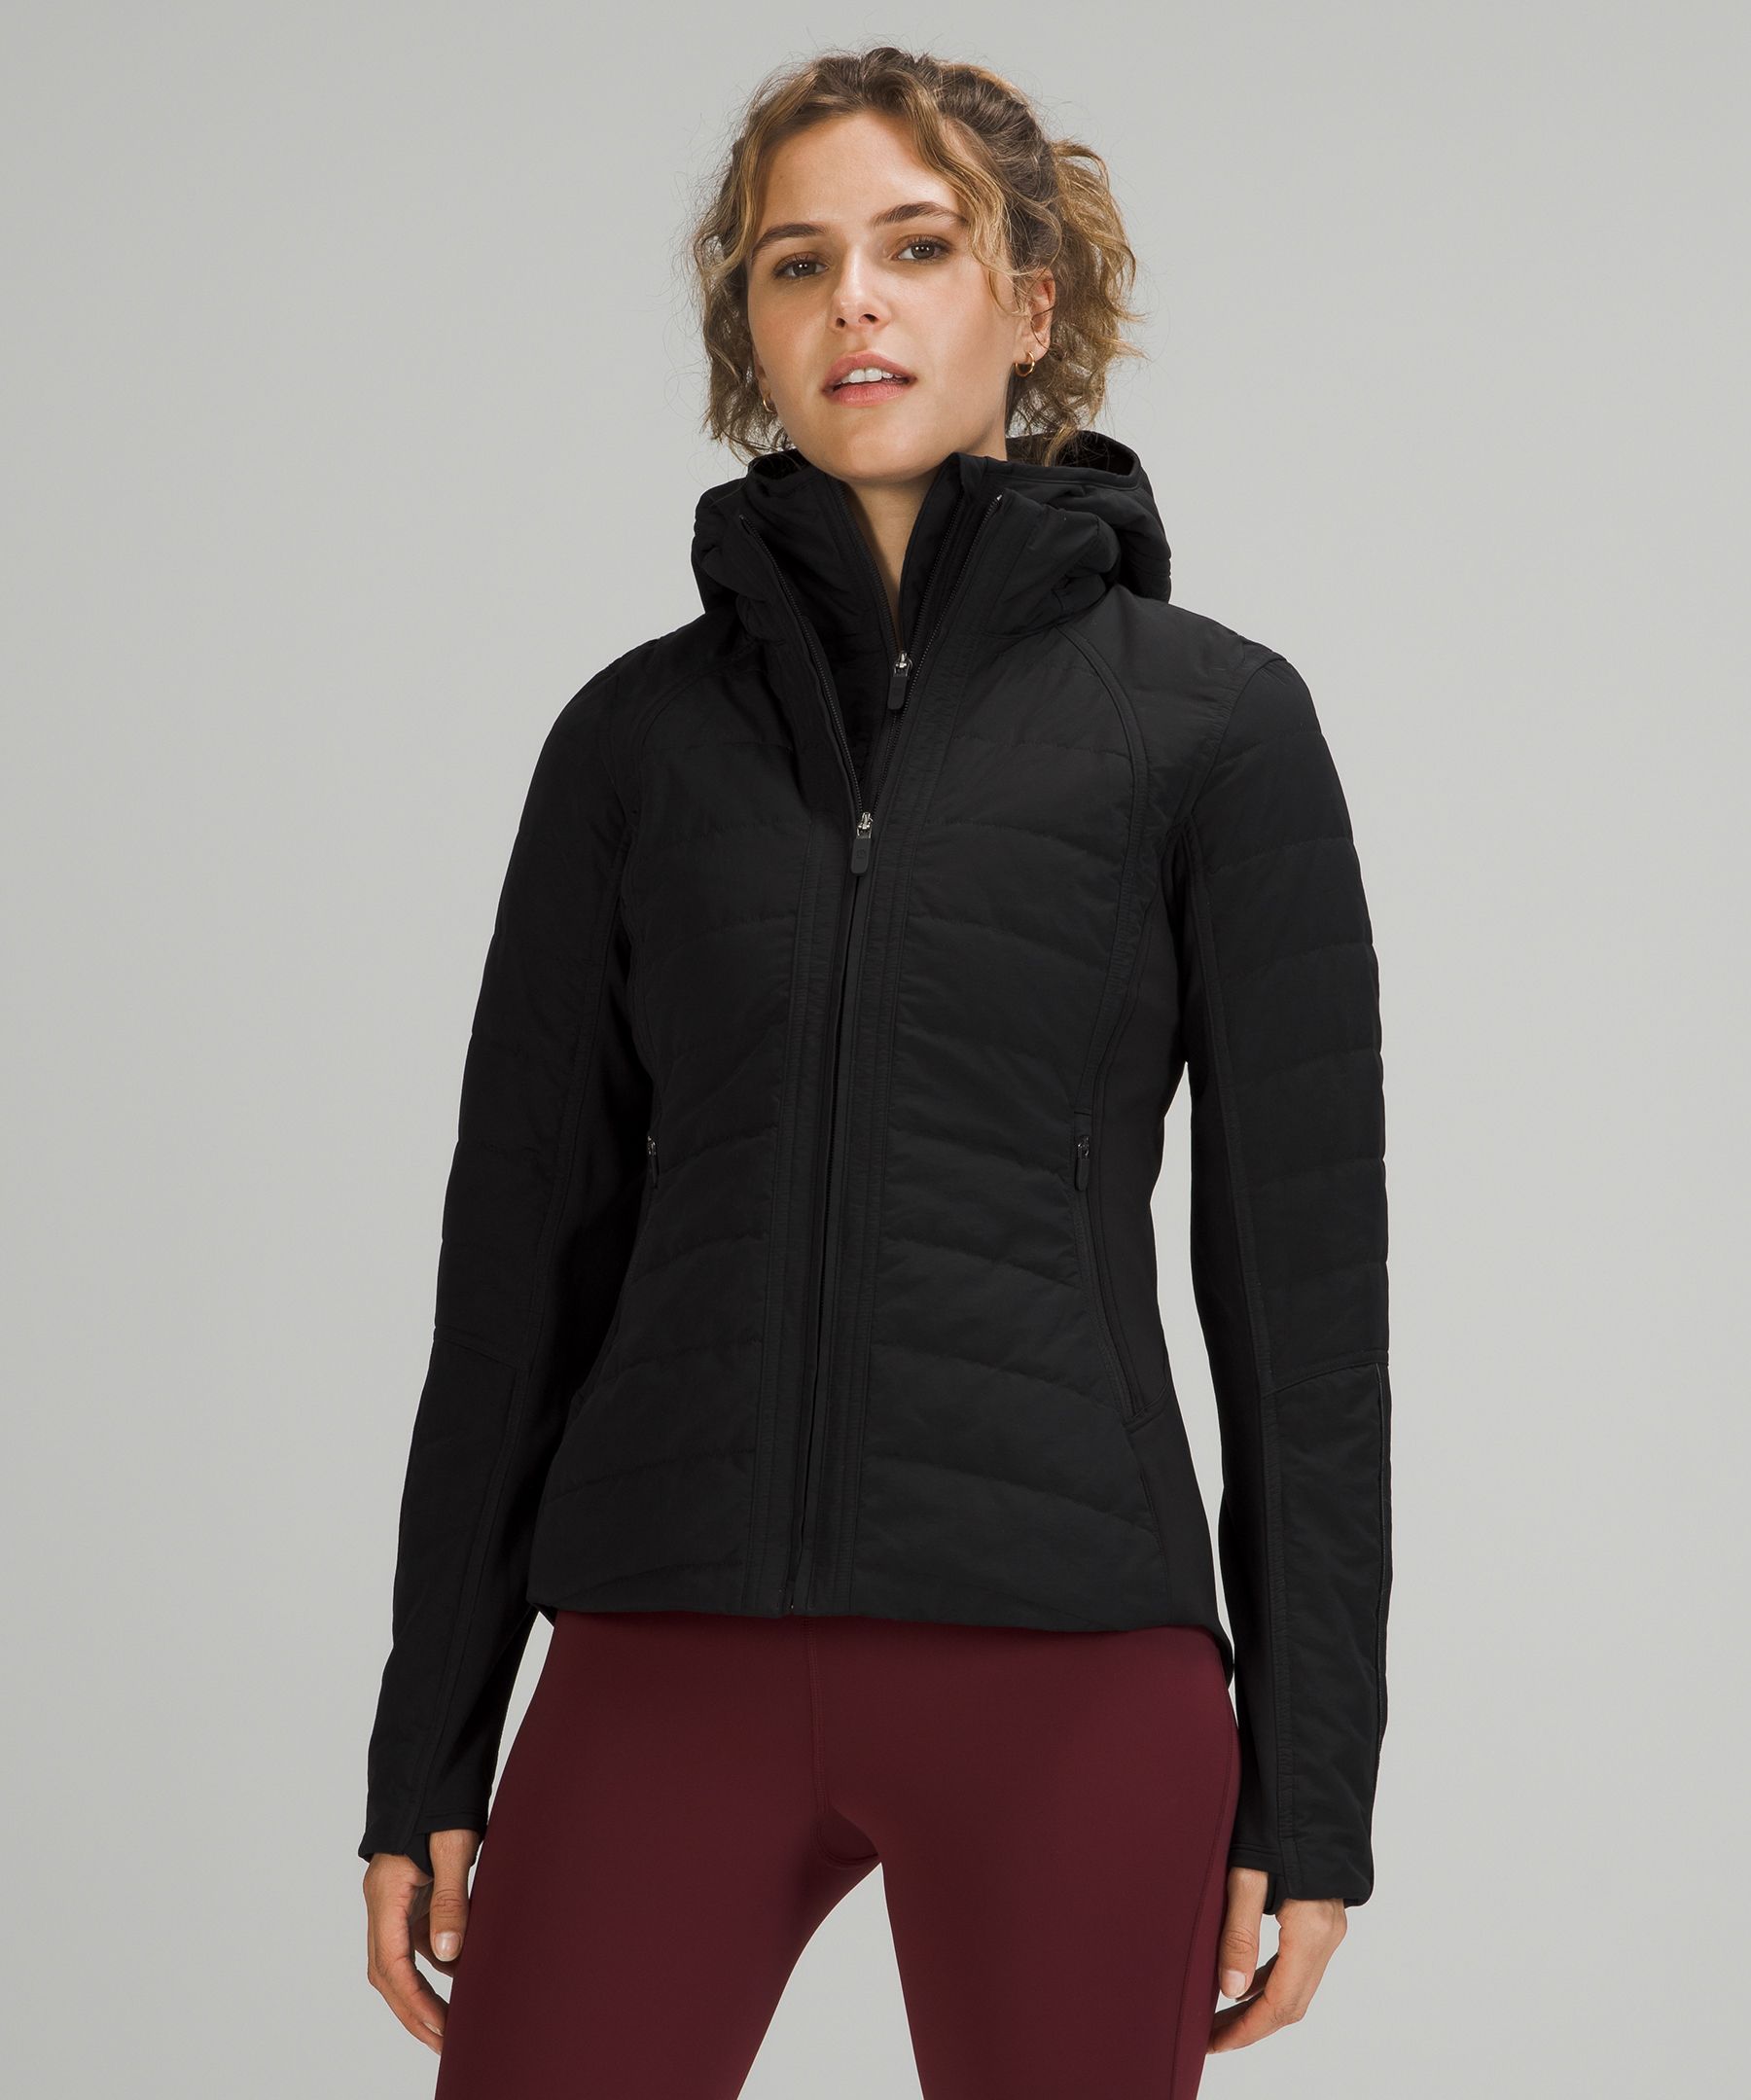 Another Mile Jacket *Online Only | Women's Coats & Jackets | lululemon